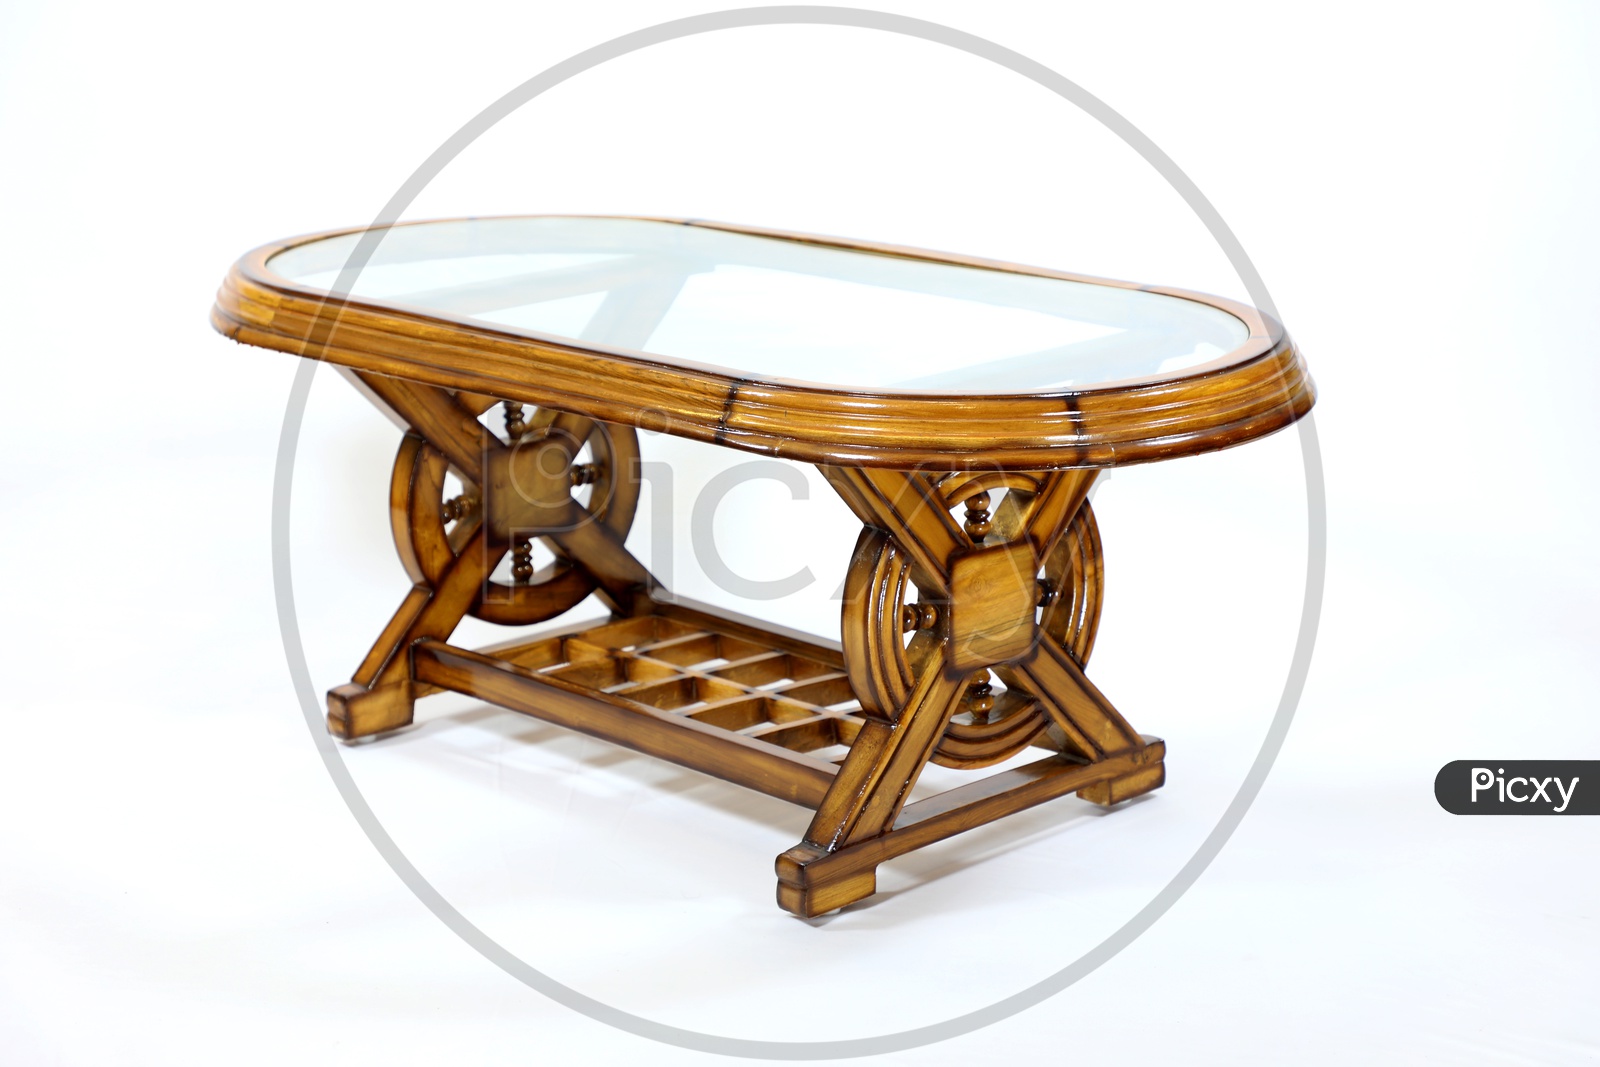 wooden center table